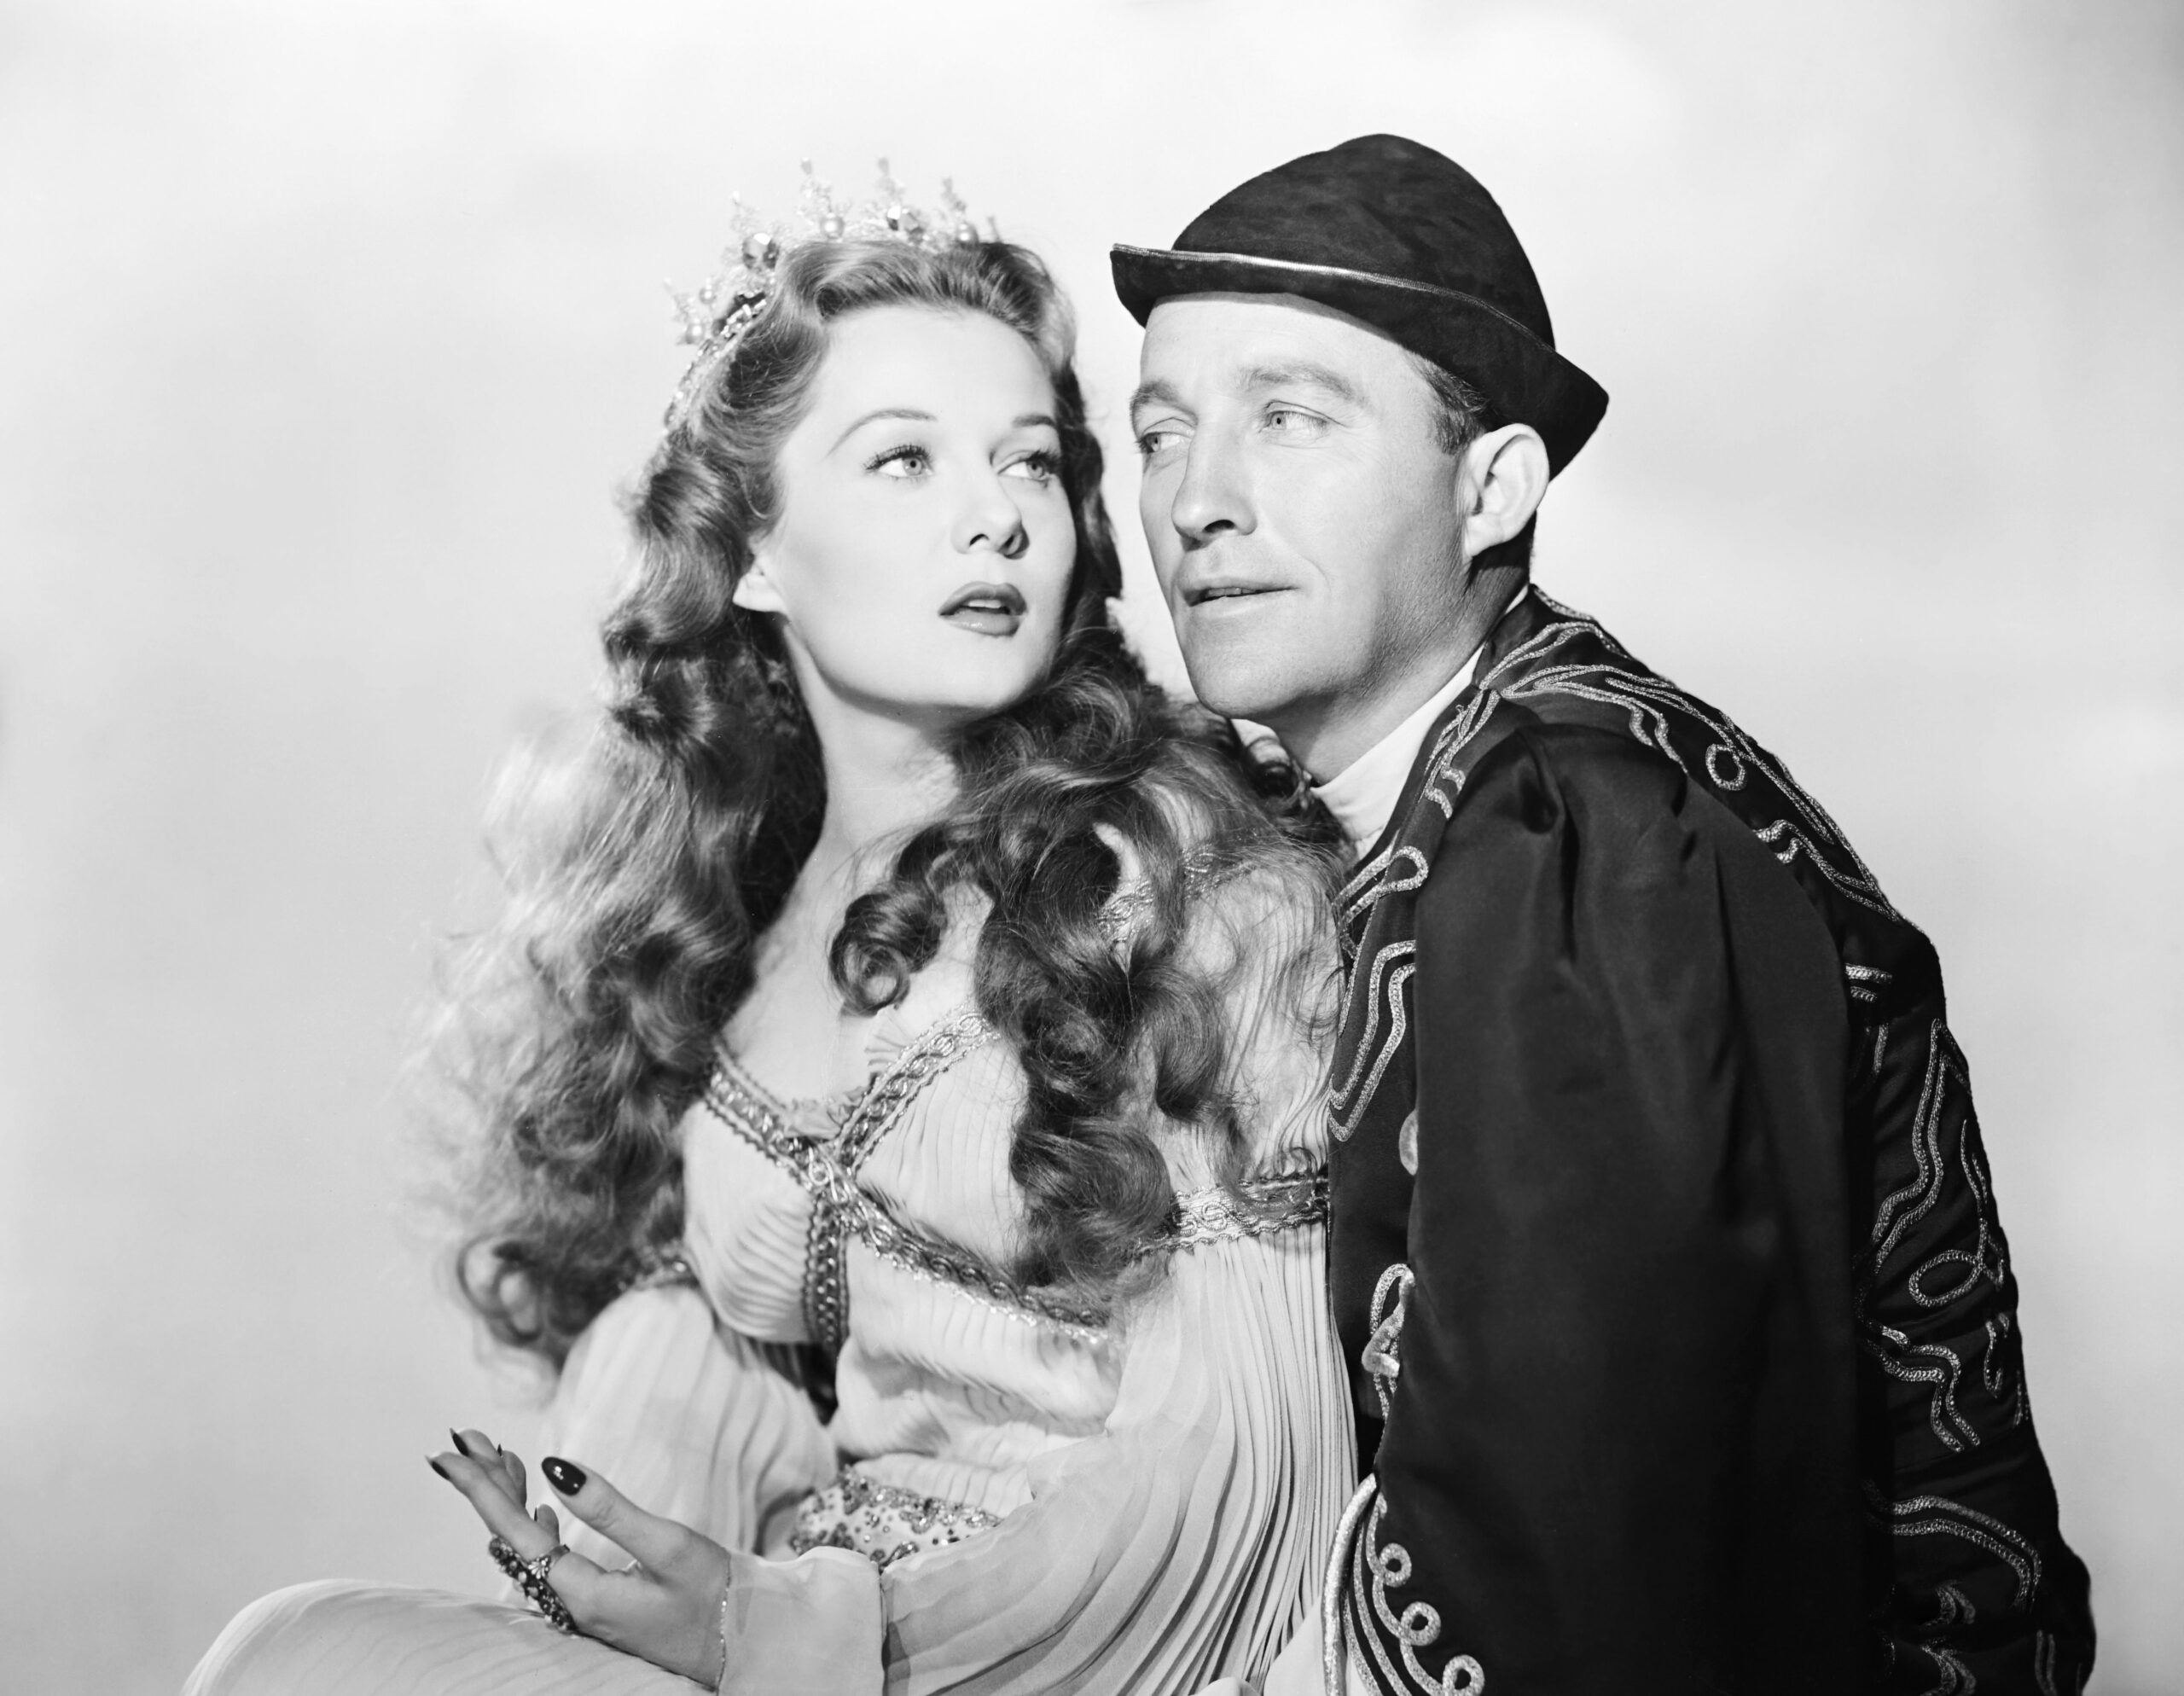 A CONNECTICUT YANKEE IN KING ARTHUR'S COURT, from left: Rhonda Fleming, Bing Crosby, 1949